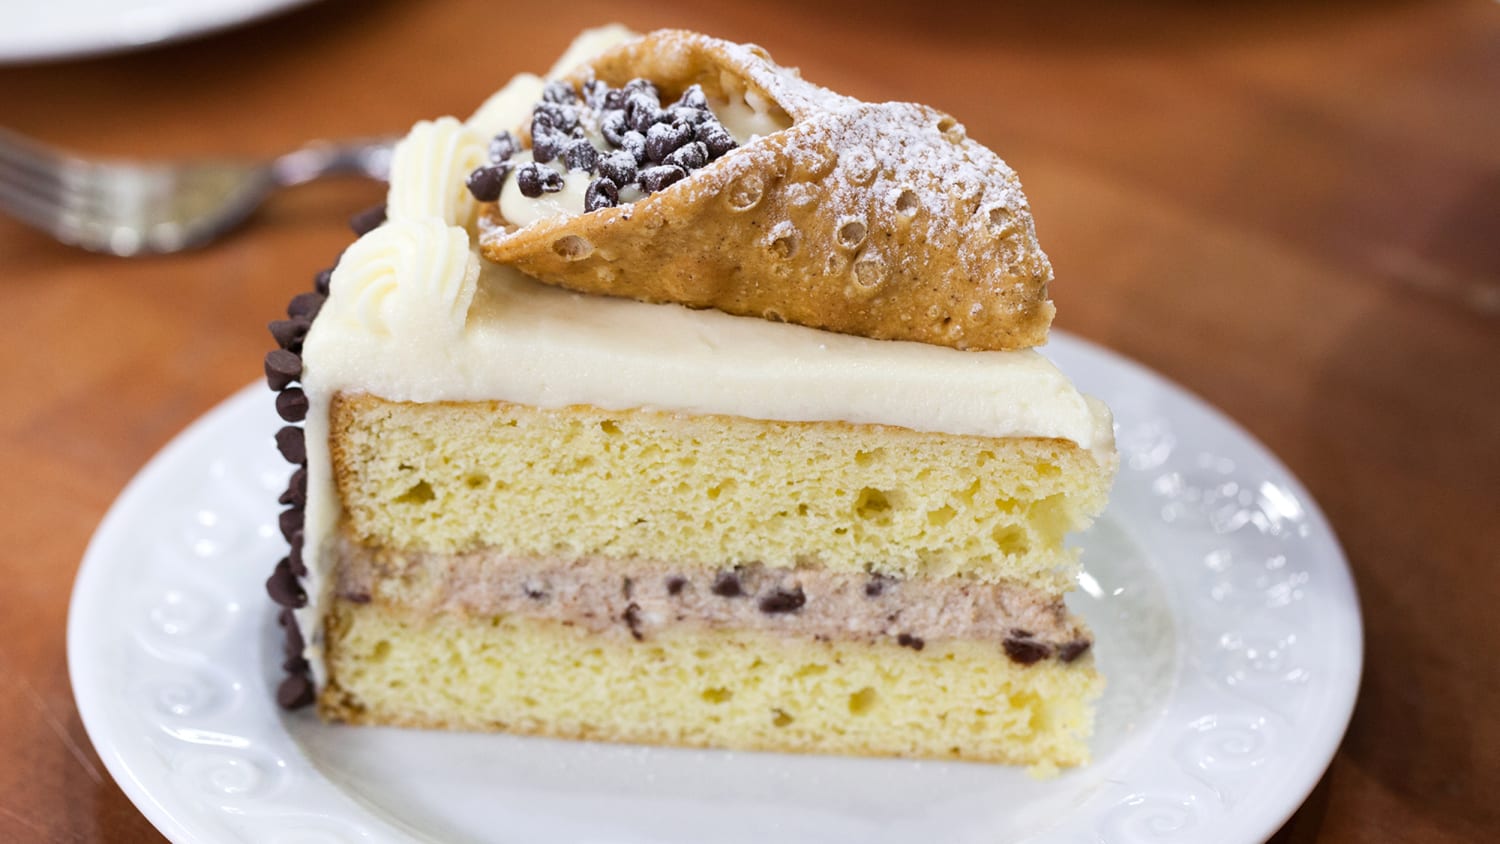 Cannoli Cake - A Mano Cafe Italian Cafe Annerley, Cakes made to order